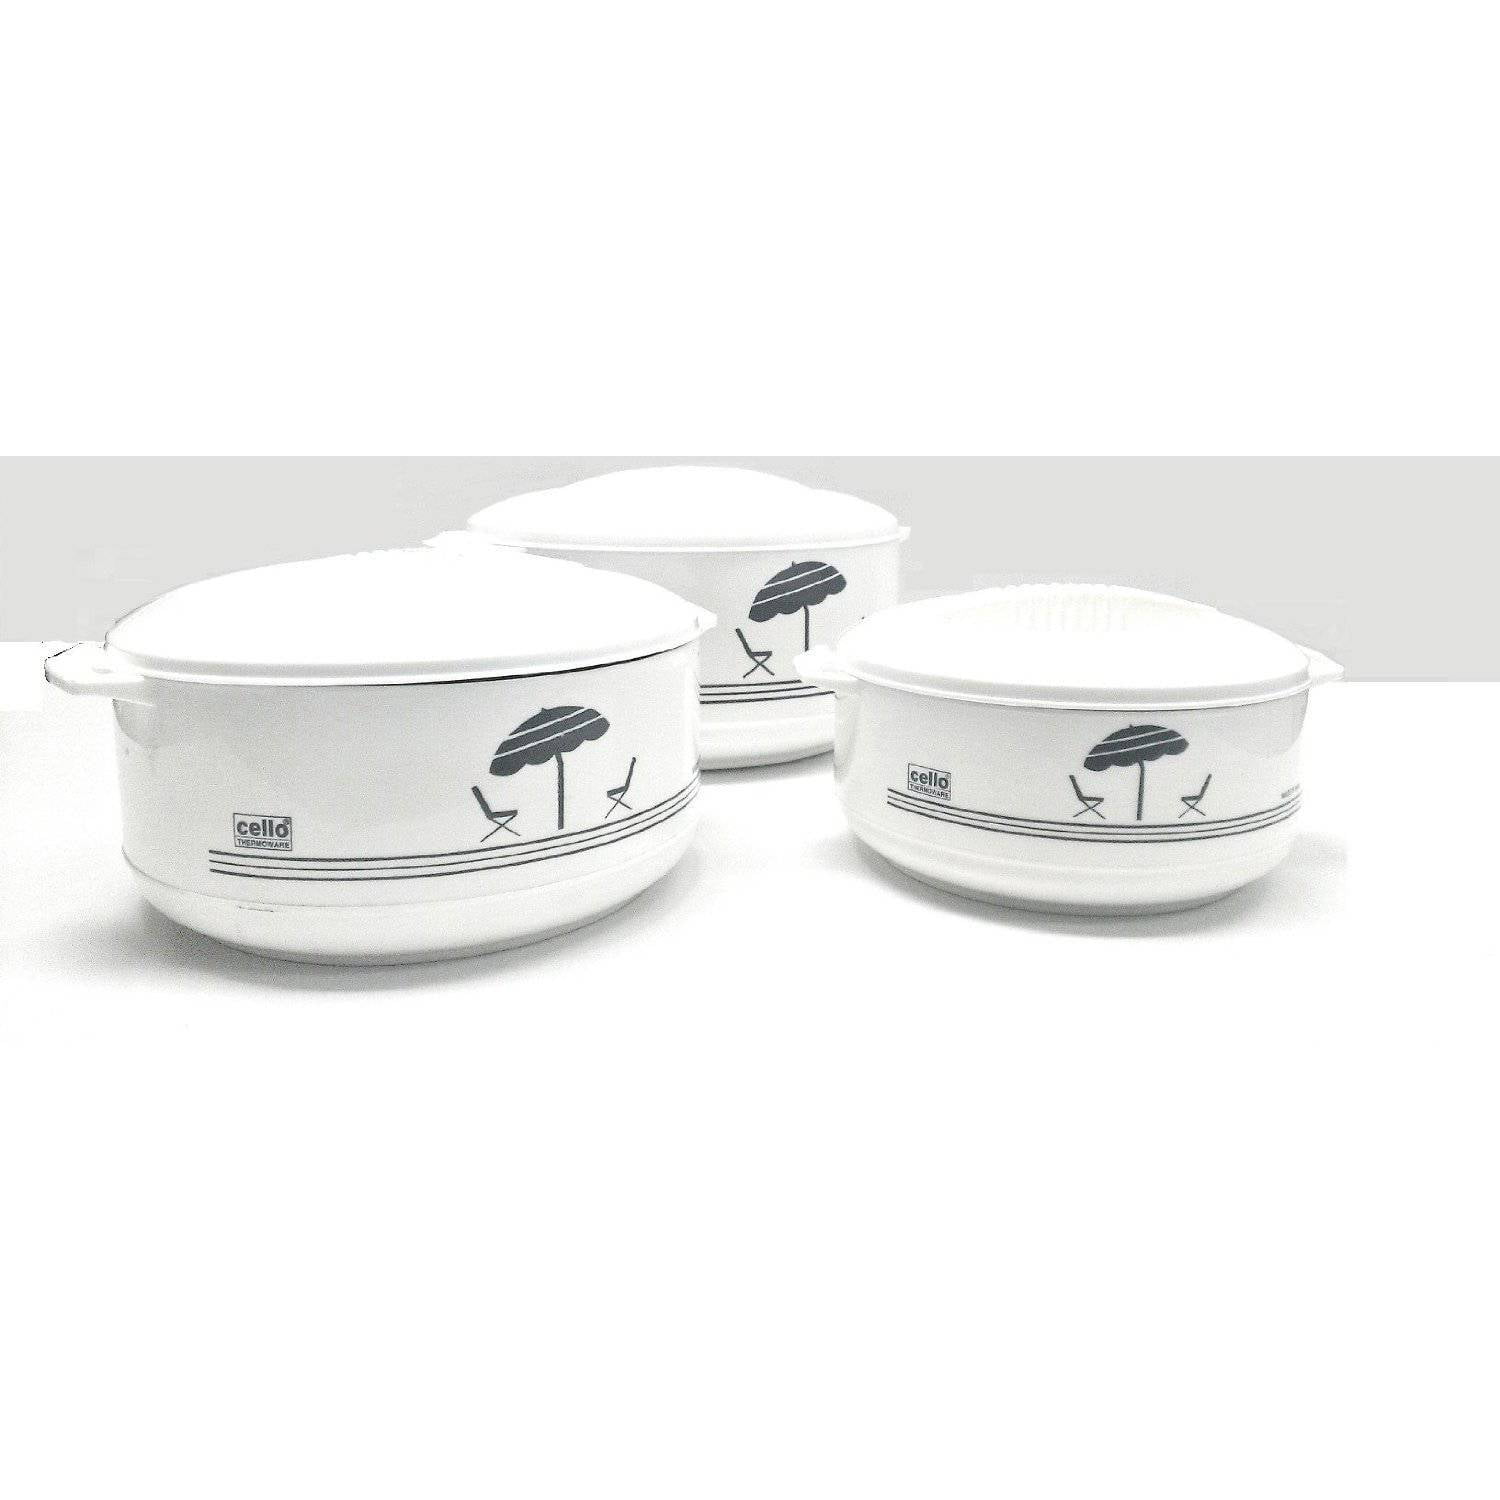 Ambiente Large Food Warmer 3pcs Hot Pot Set of Insulated Casseroles White Color 